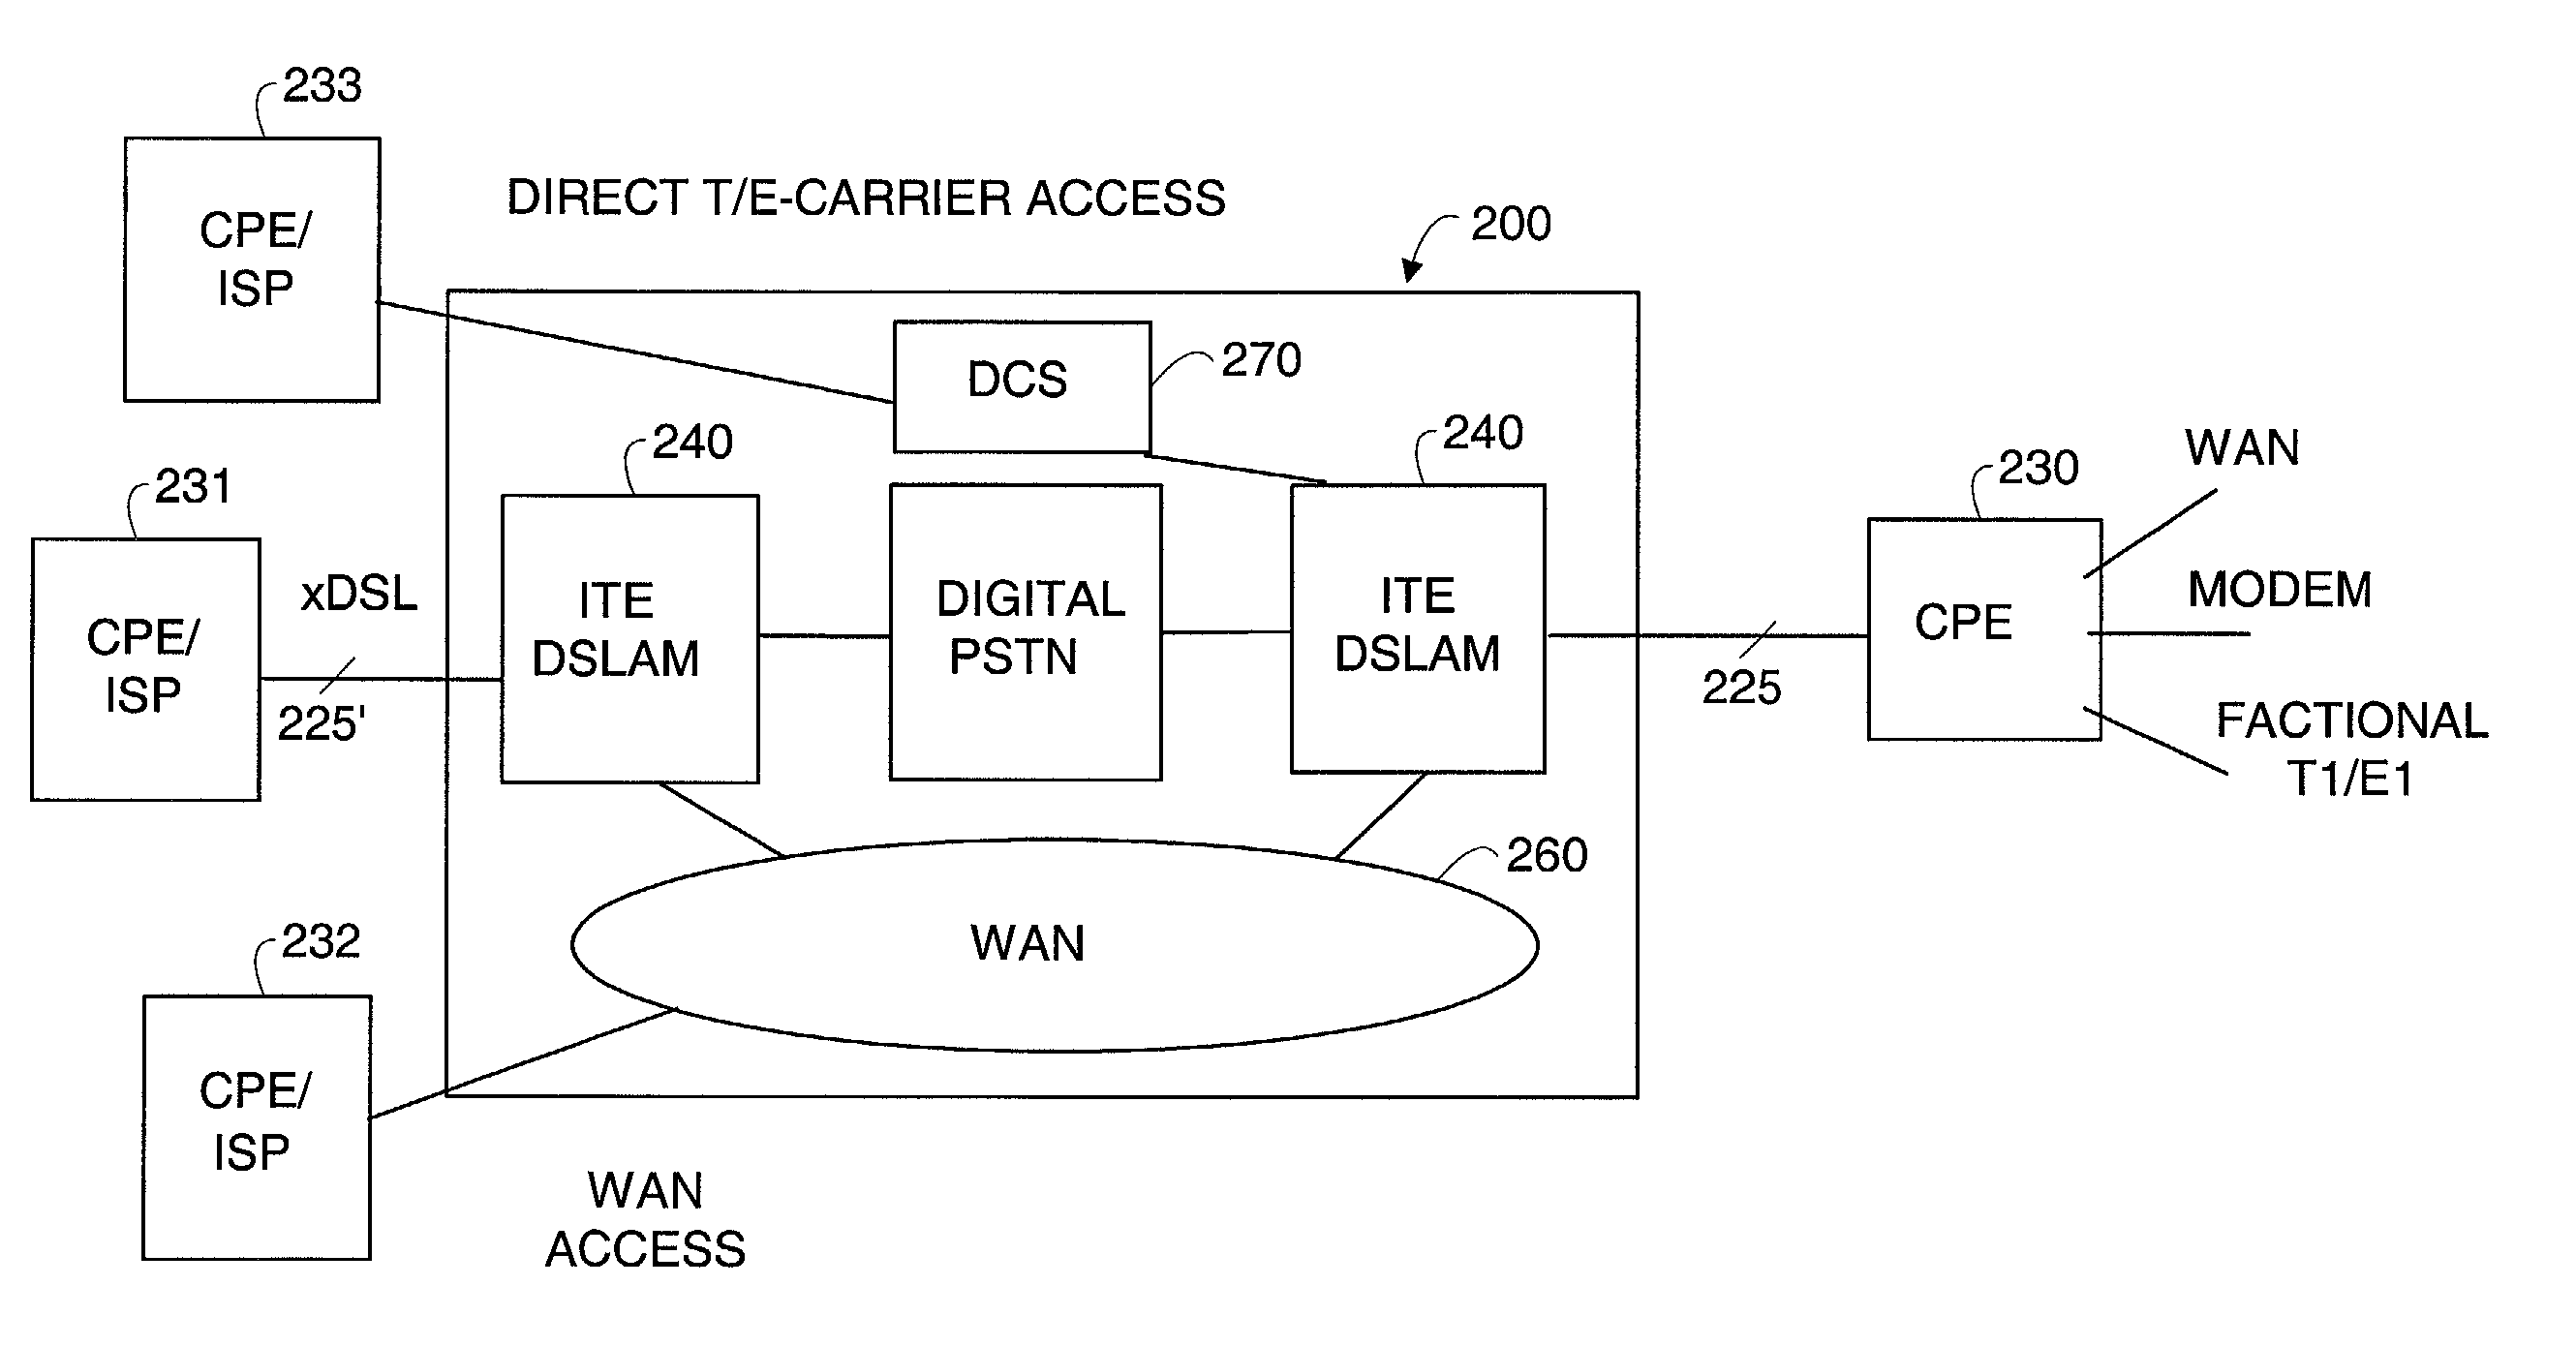 Configurable digital subscriber loop access and end-to-end data and analog voice connection system